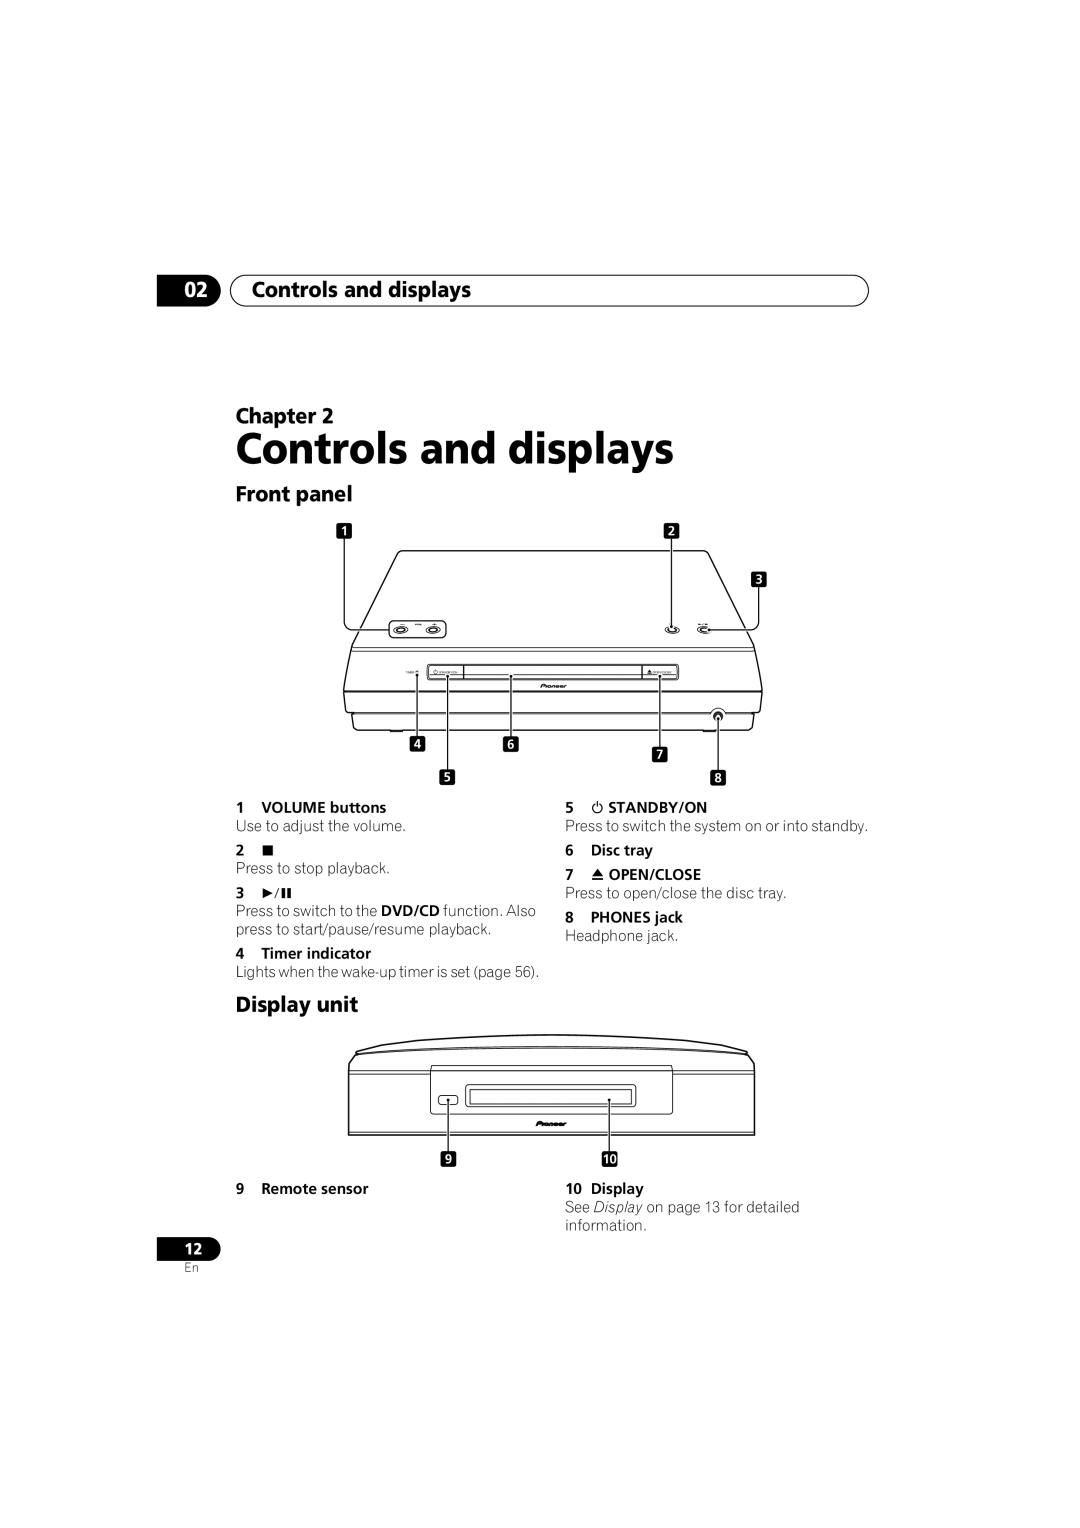 Pioneer S-DV990ST, S-DV99ST manual 02Controls and displays Chapter, Front panel, Display unit 